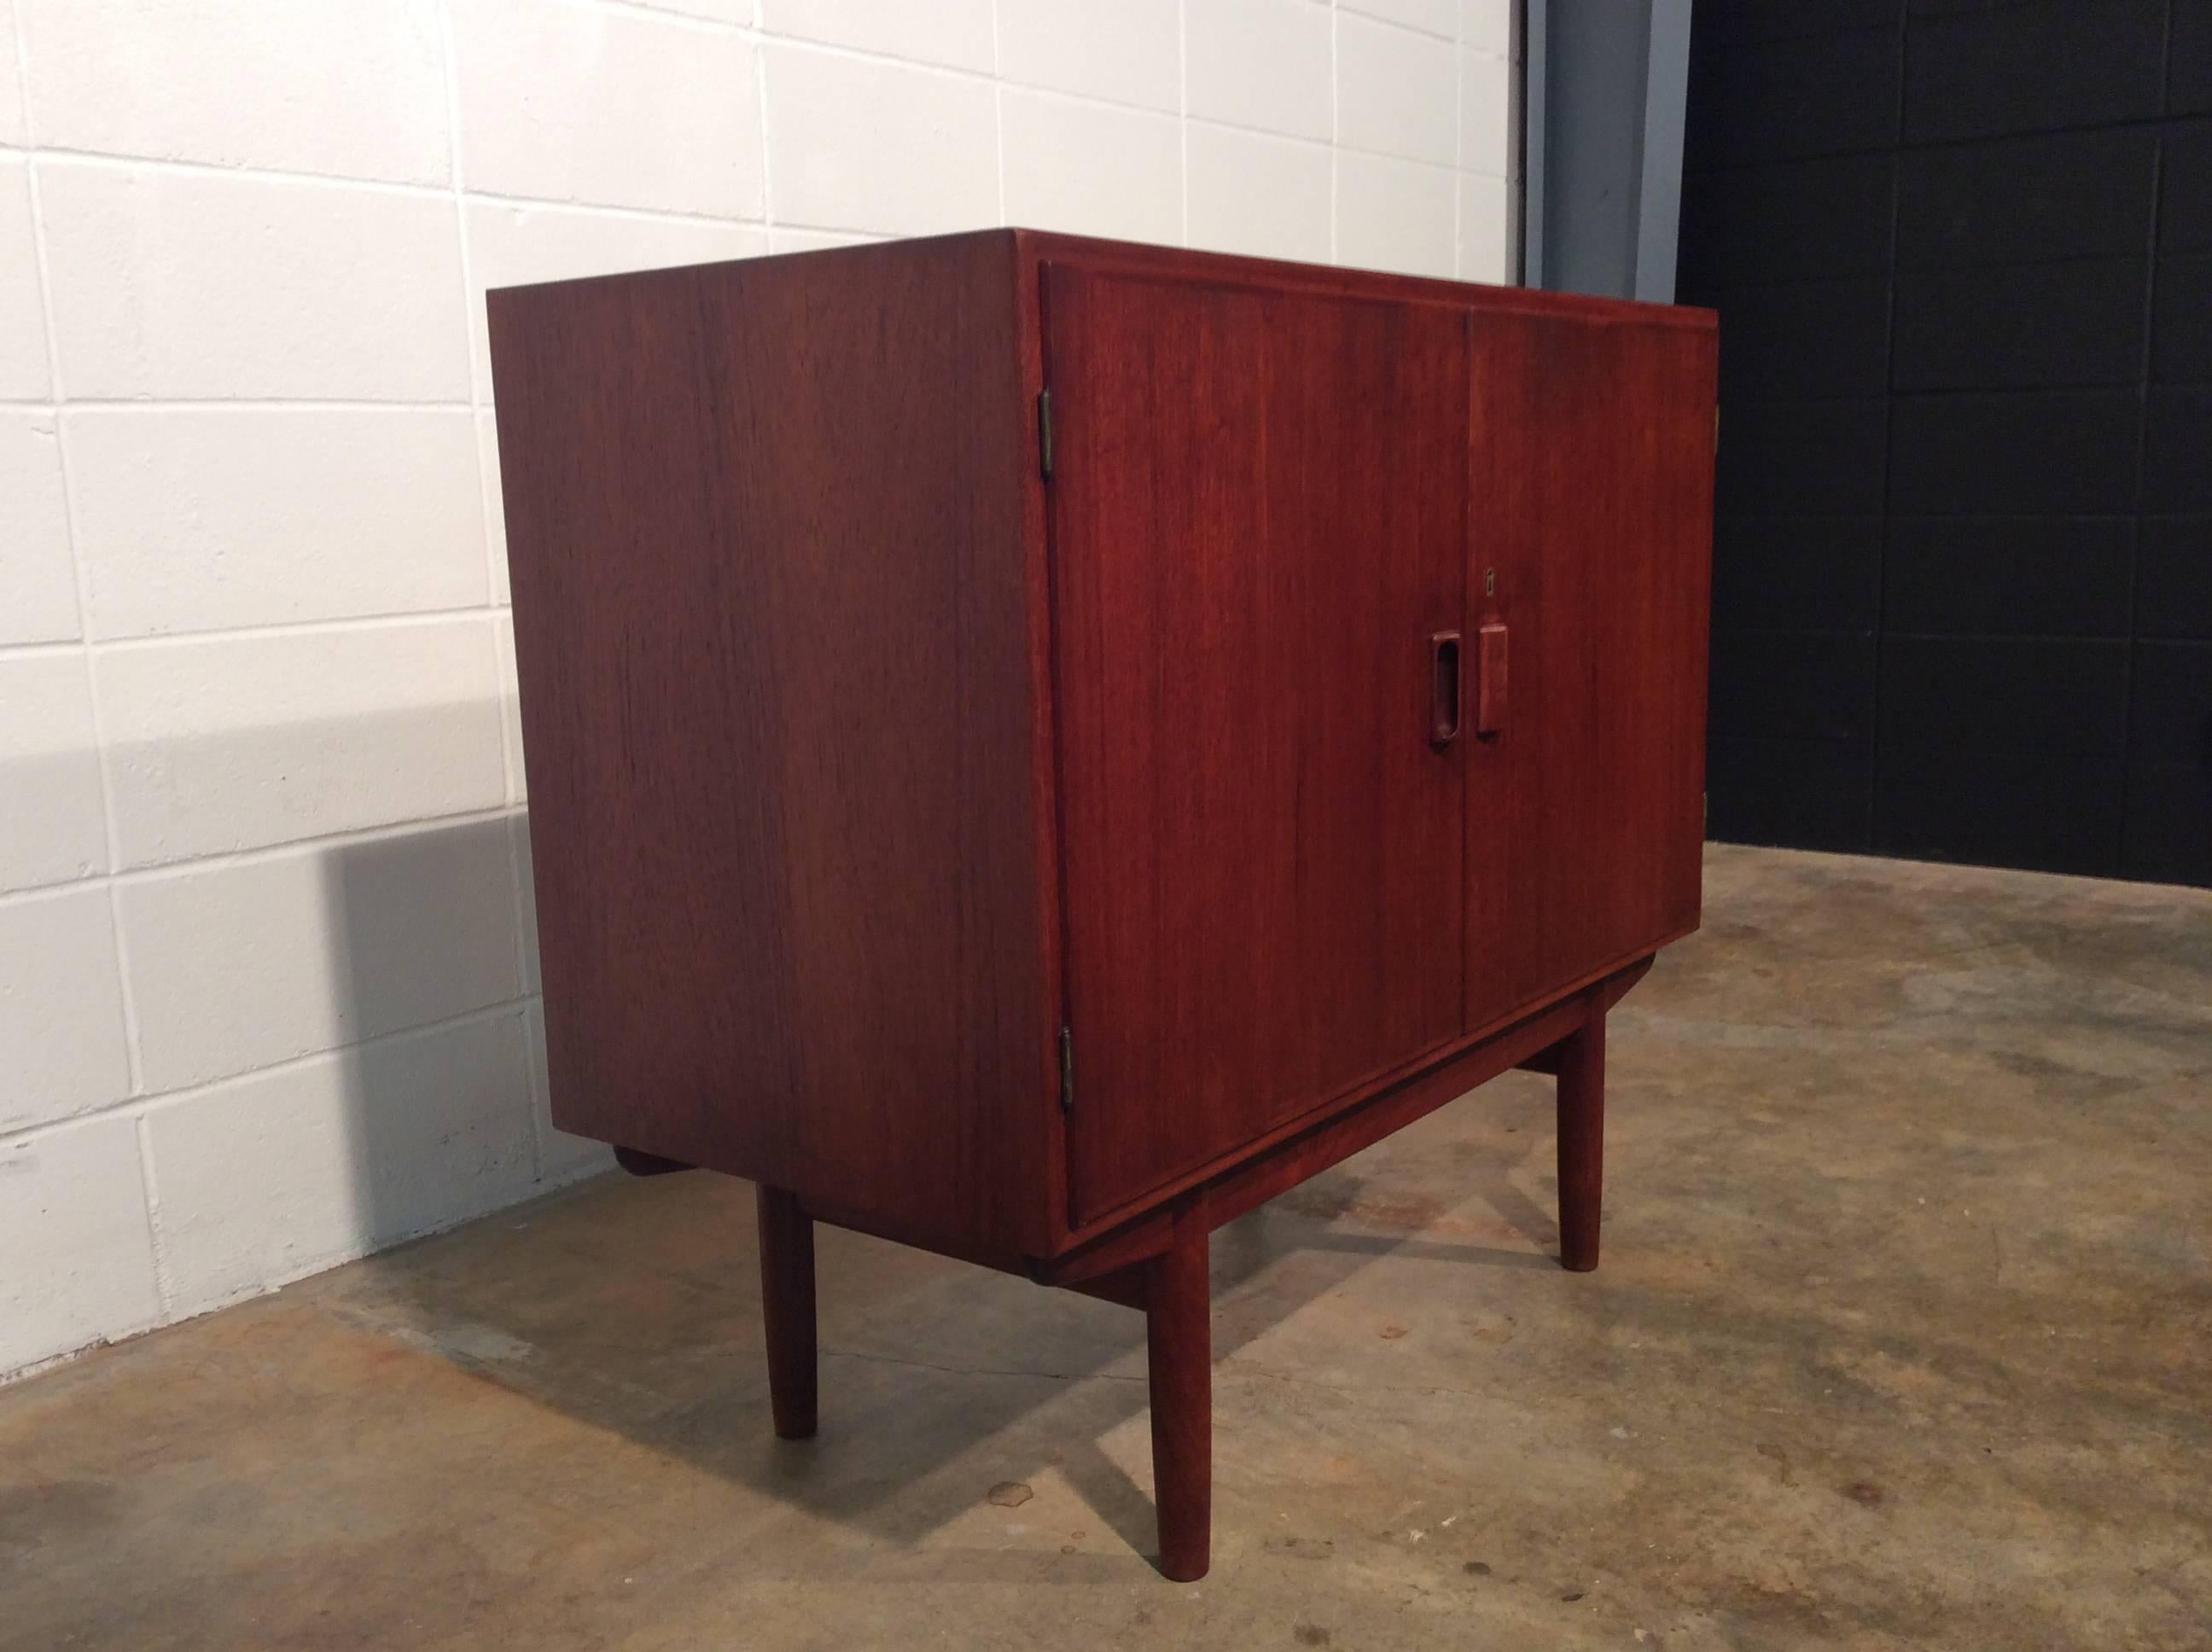 Early 1953 Danish modern teak locking (key is included) liquor cabinet designed by Børge Mogensen for Soborg Mobelfabrik. Bottle and decanters can be stored on the bottom left shelf with still three shelves for glasses and bar tools.
No known